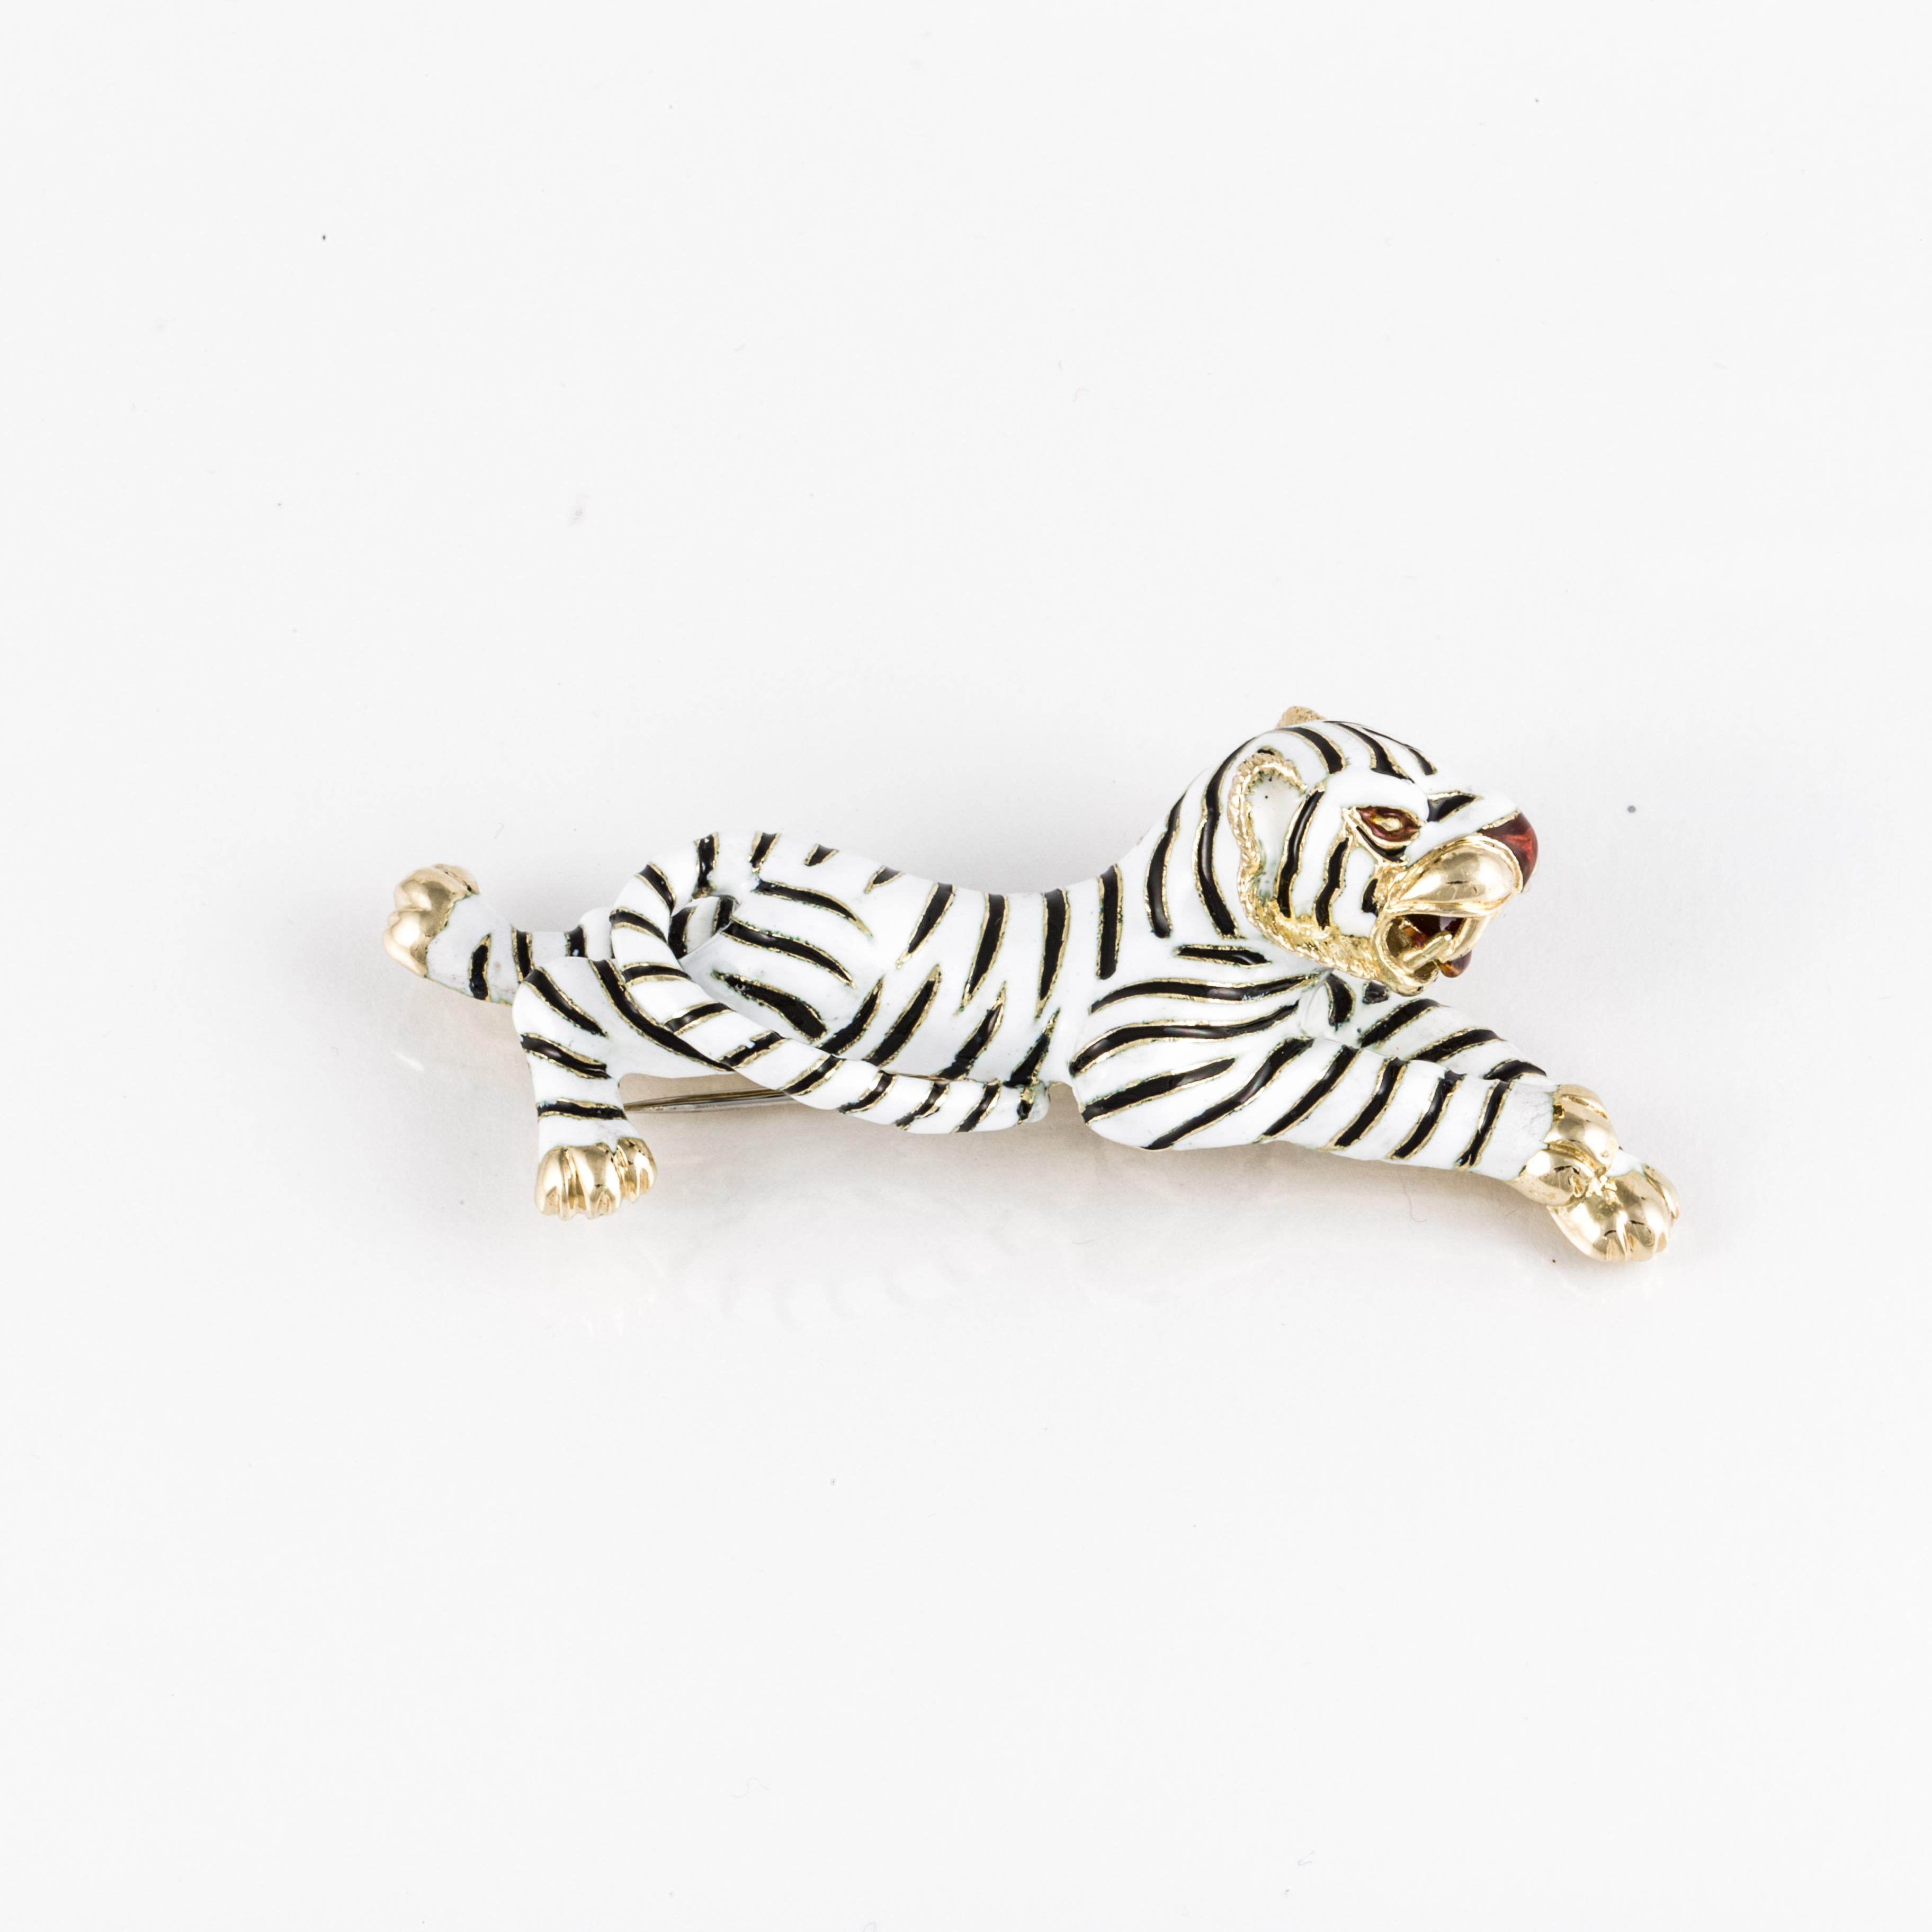 Tiger brooch composed of 18K yellow gold with white enamel body and black enamel stripes.  Both the tongue and nose are red enamel.  The outstretched tiger measures 3 inches long, 3/4 inches wide and stands 1 inch tall.  Closure is a double prong